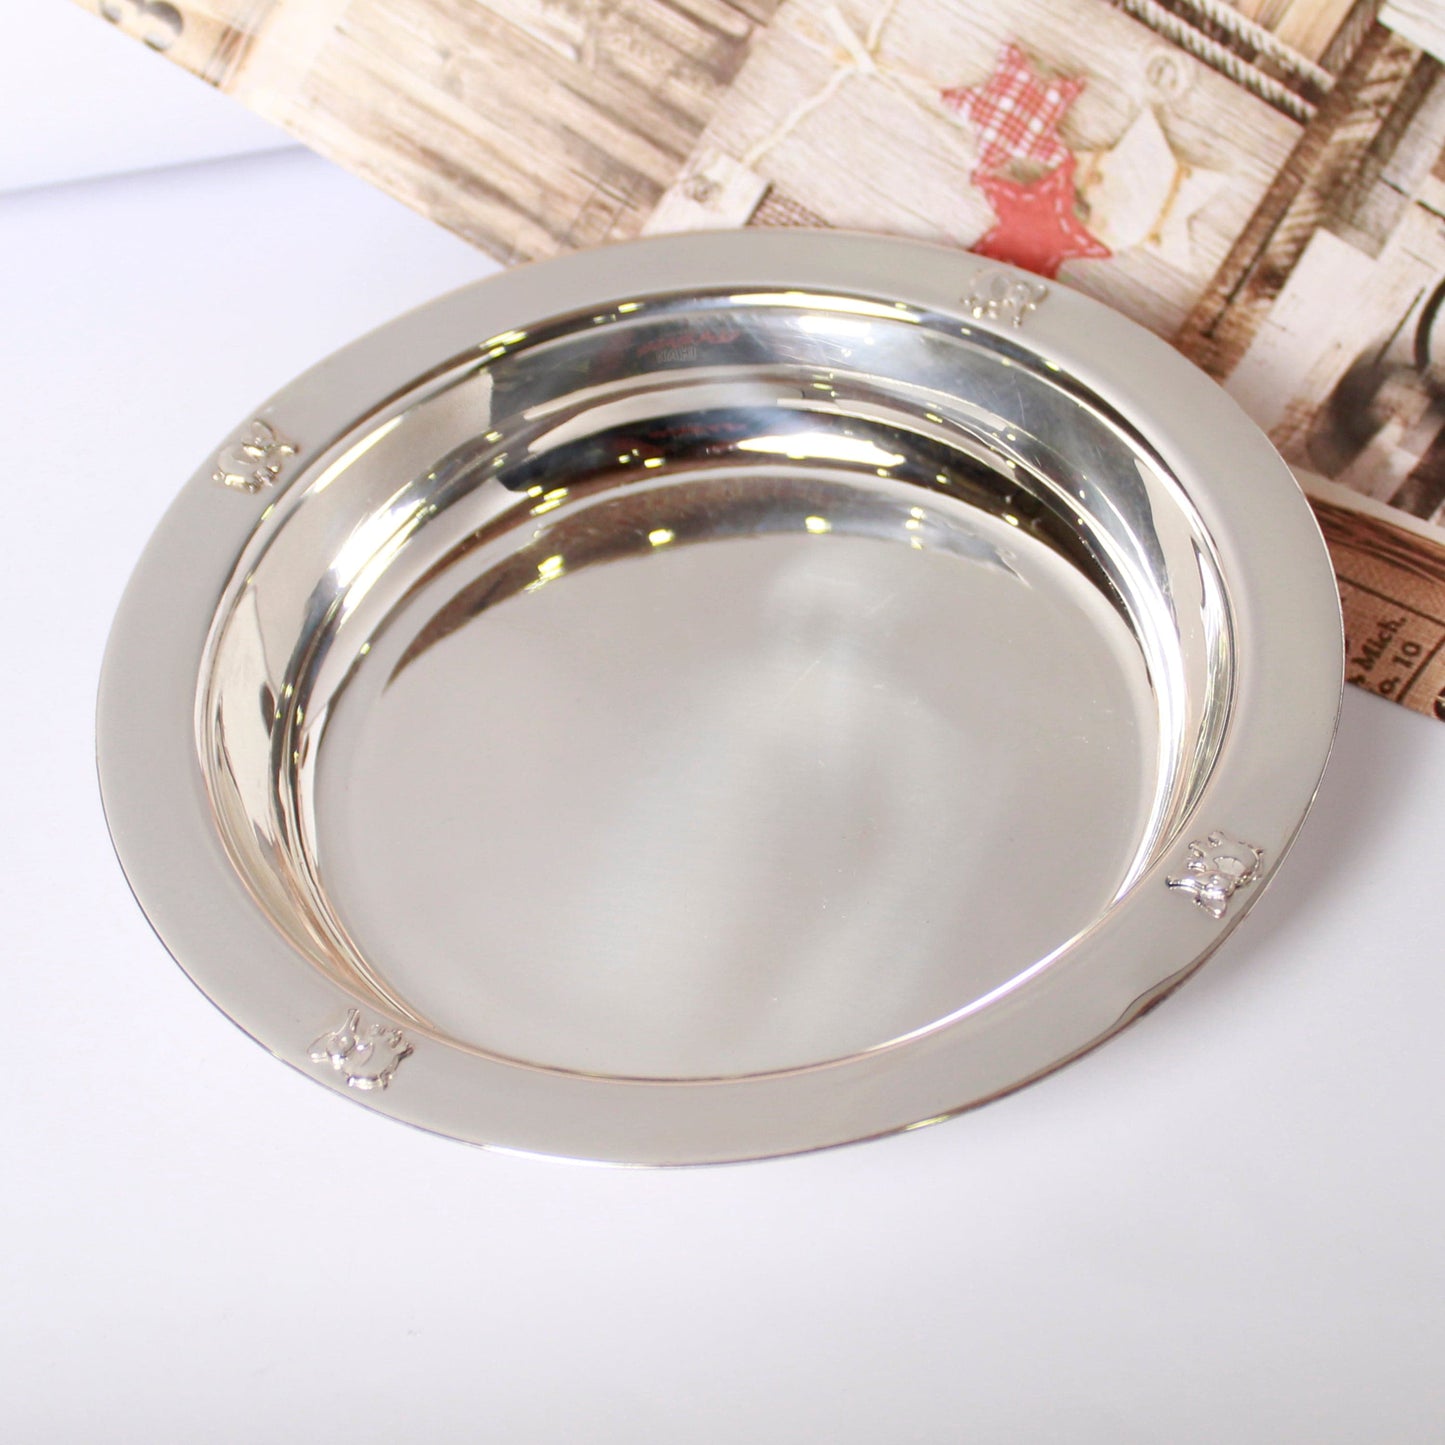 Classy Silver Bowl For Baby